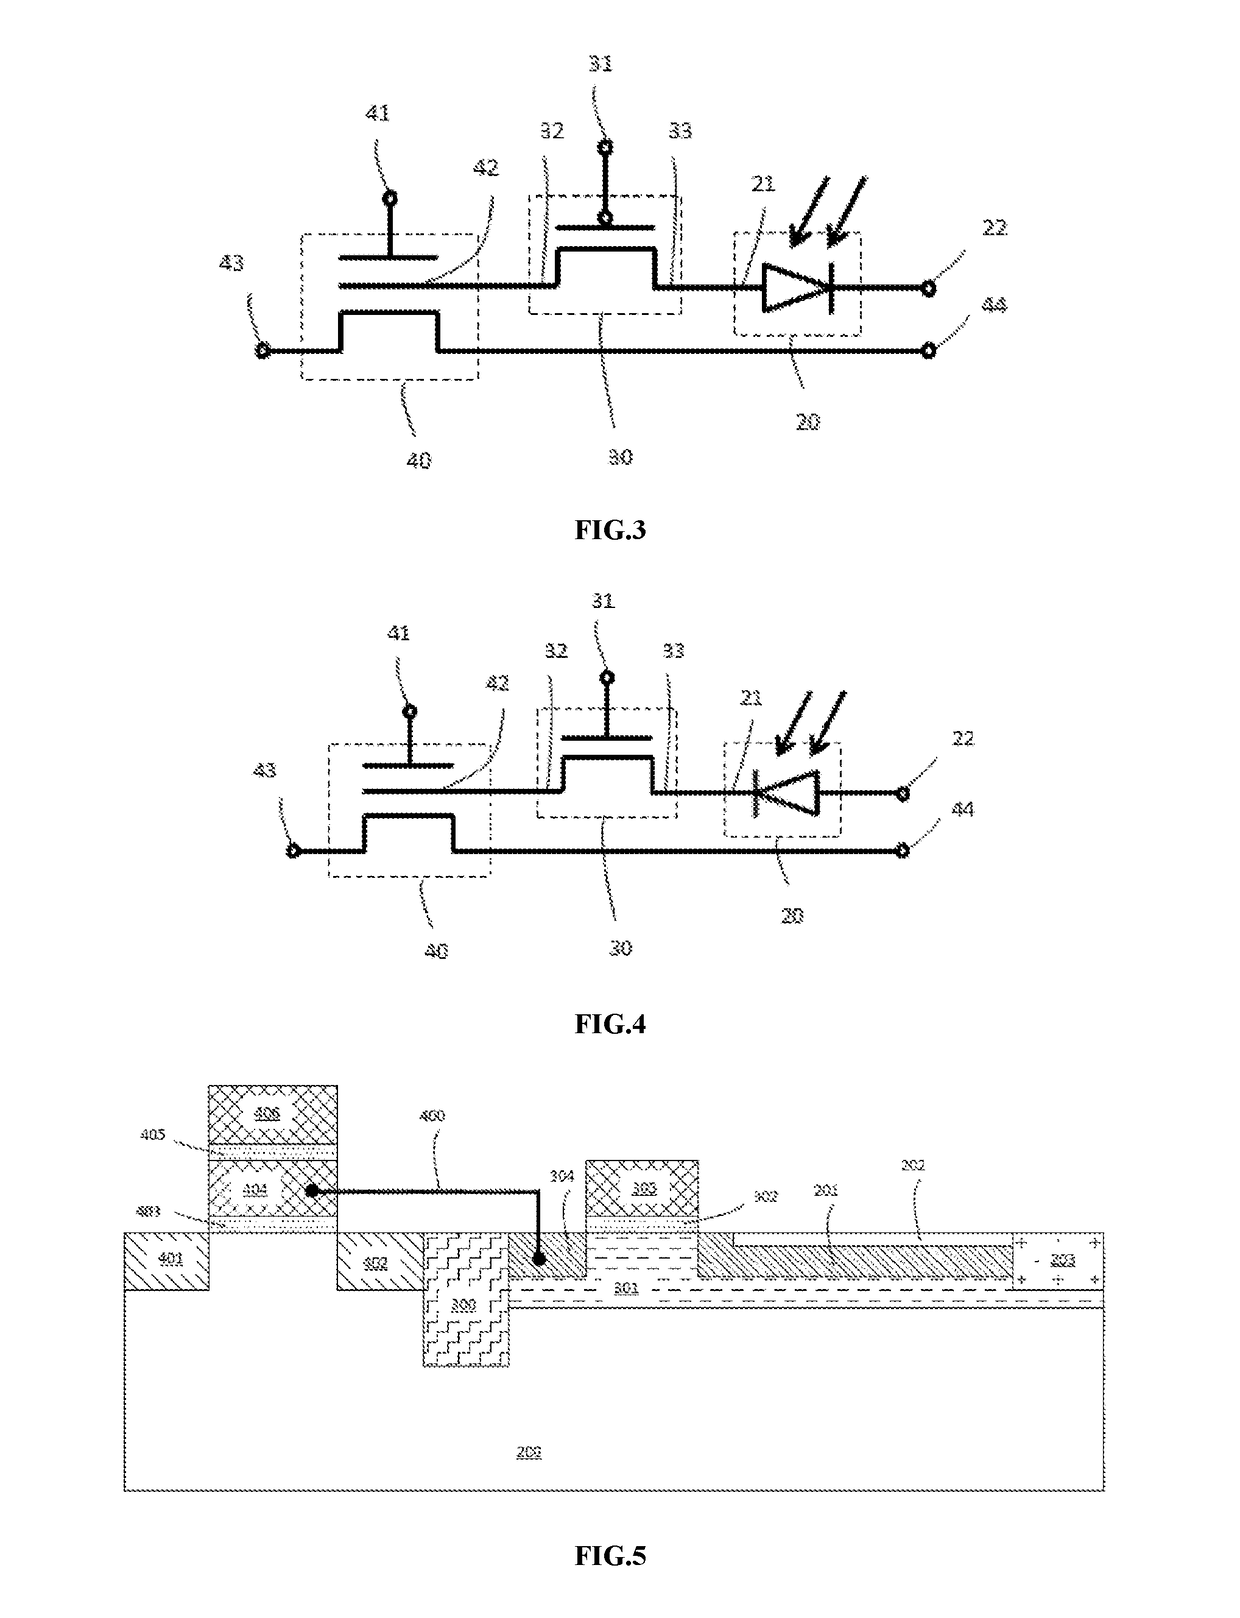 Semiconductor photosensitive unit and semiconductor photosensitive unit array thereof